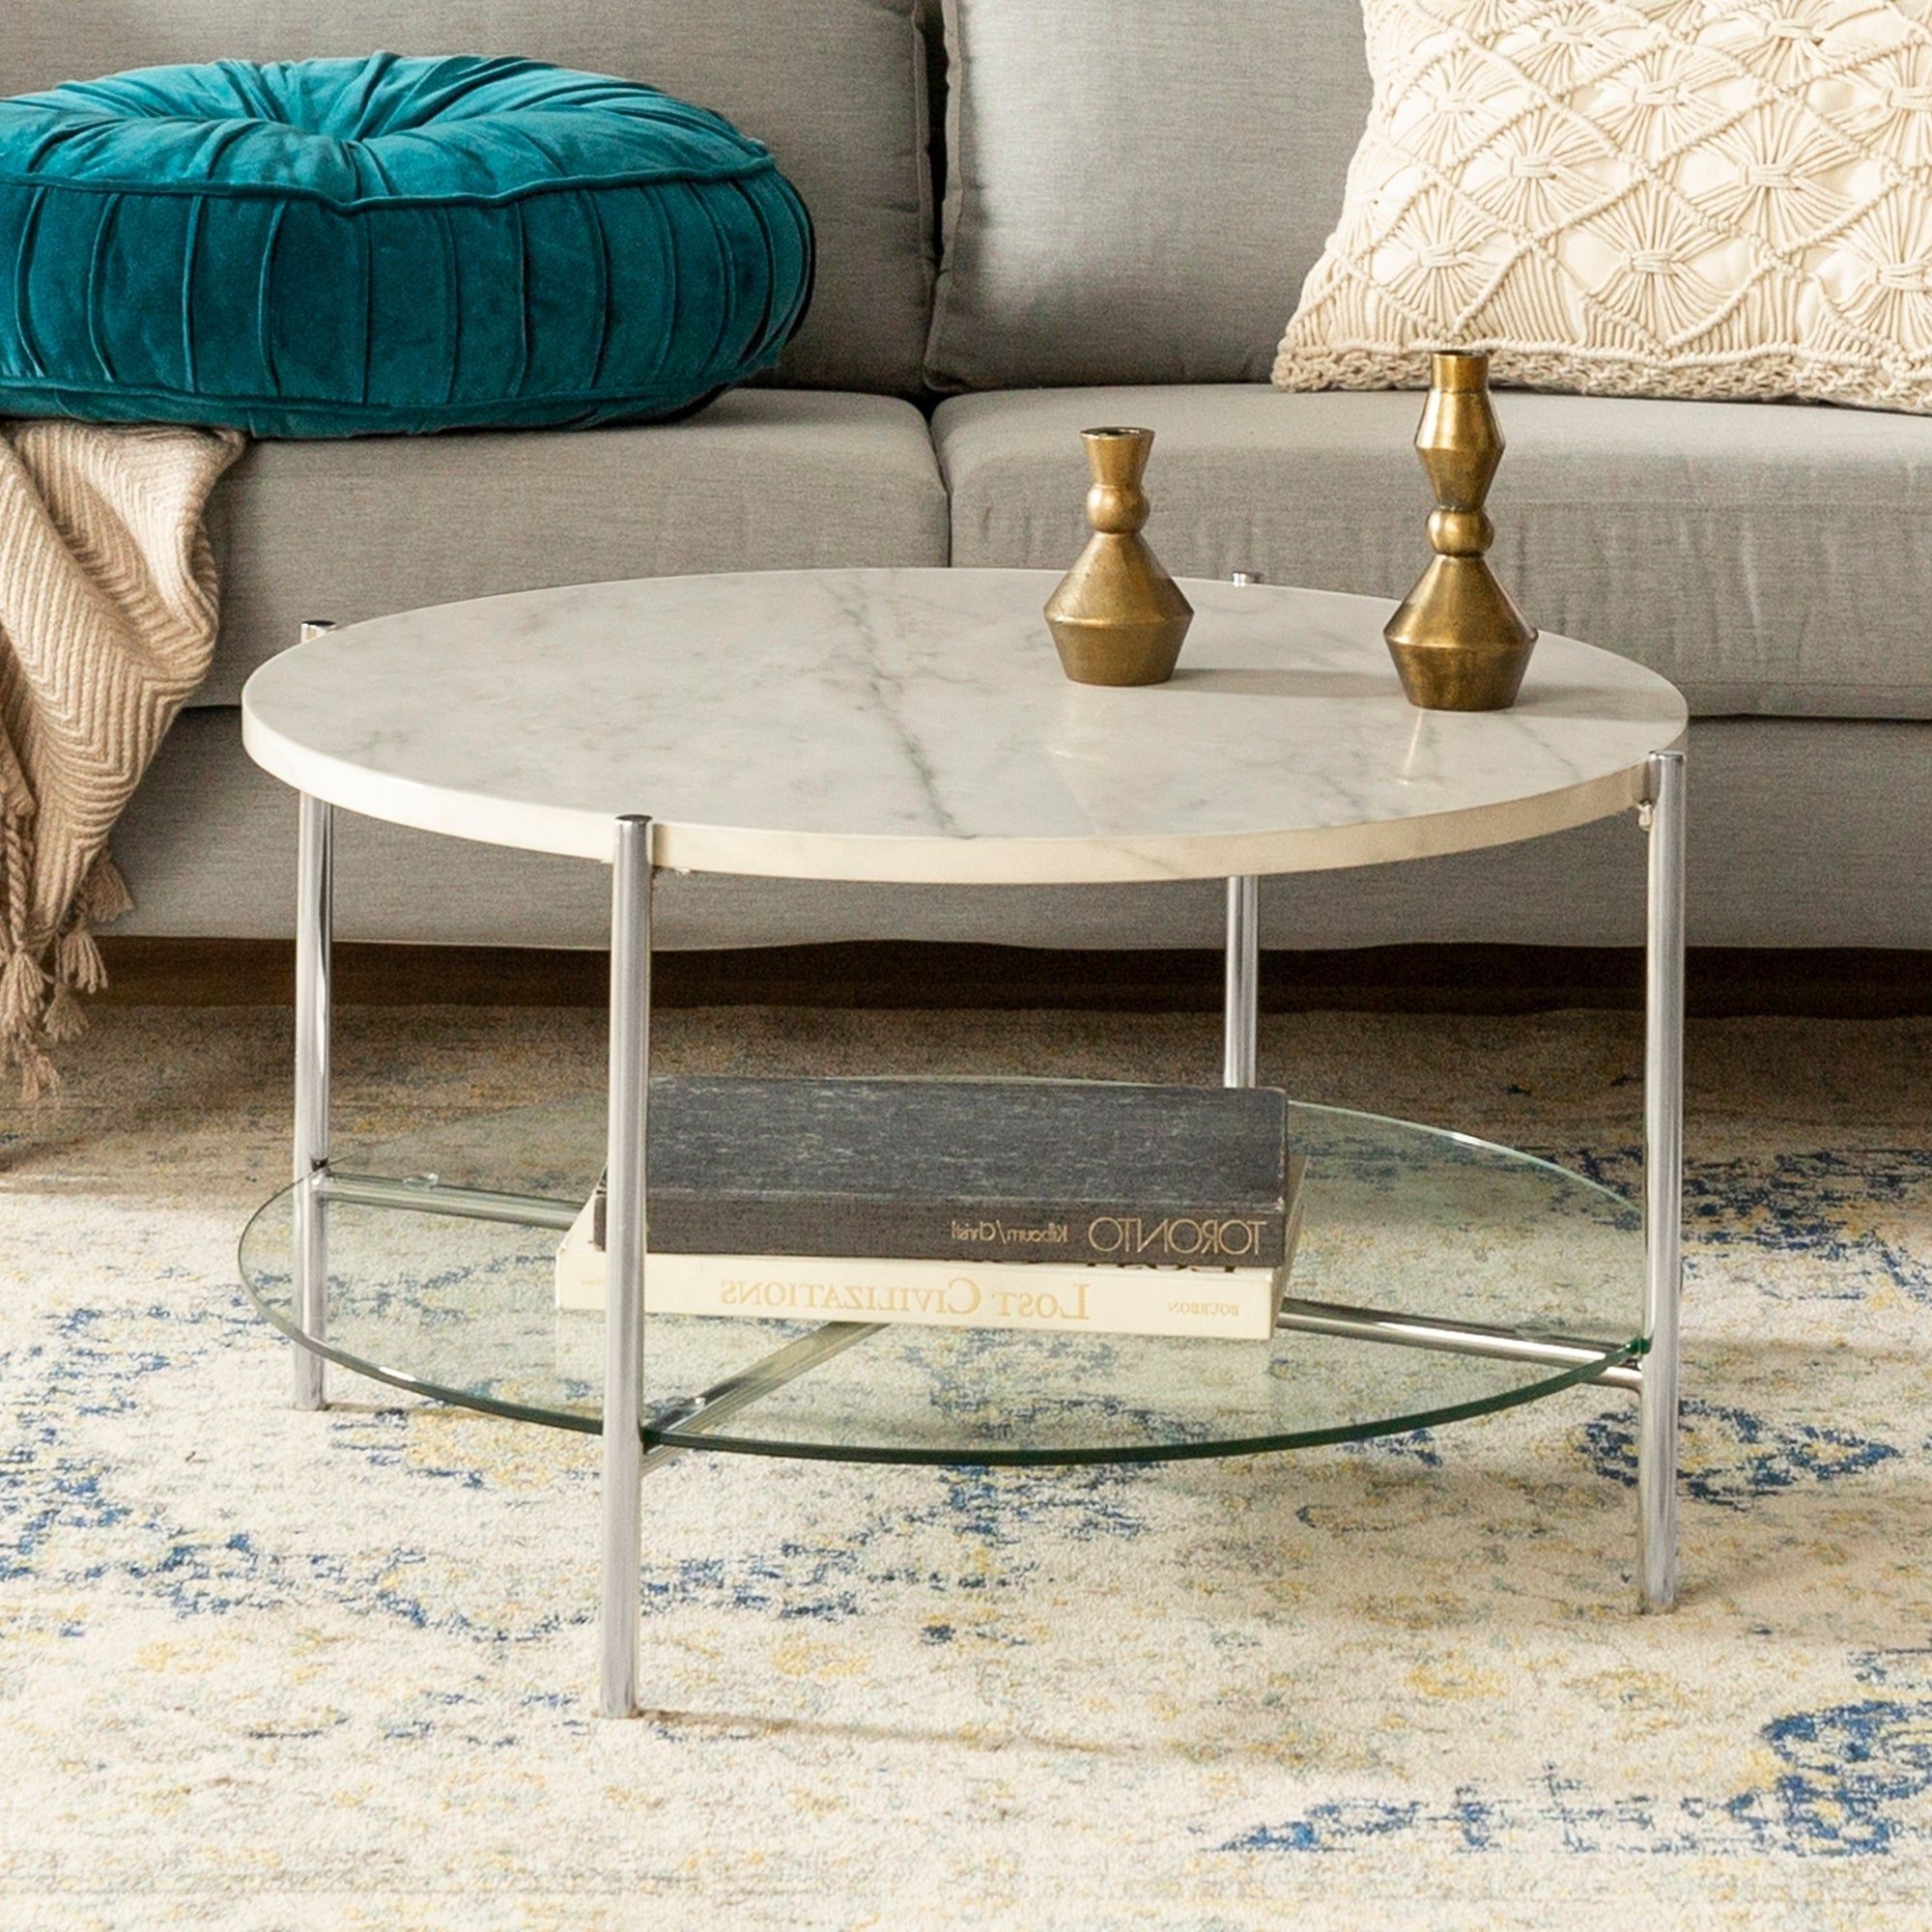 Silver Orchid 32 Inch Ipsen Round Coffee Table, Modern, Faux Marble Accent  Cocktail Table For Living Room – 32 X 32 X 17h In Well Liked Silver Orchid Ipsen Contemporary Glass Top Coffee Tables (View 11 of 20)